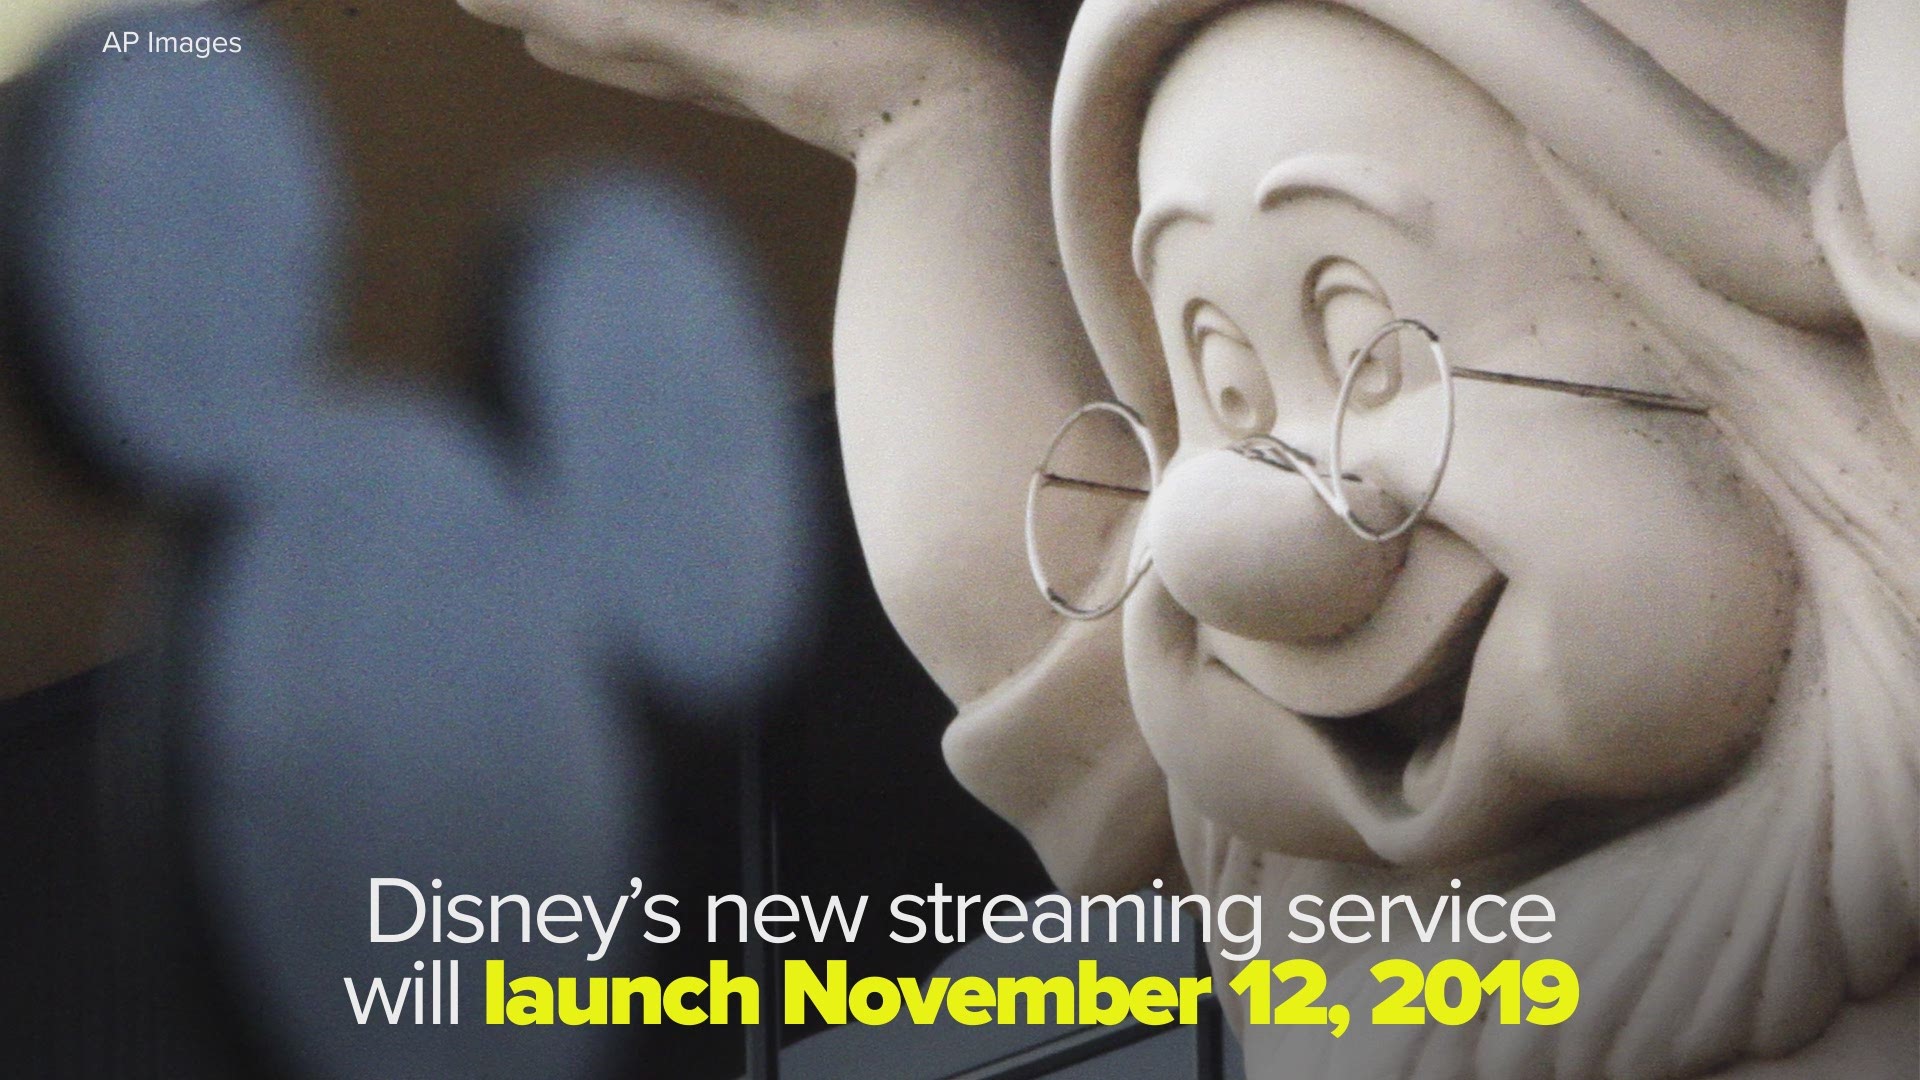 The world is getting its first glimpse at Disney's new streaming service as the company detailed a lot of what subscribers can expect.